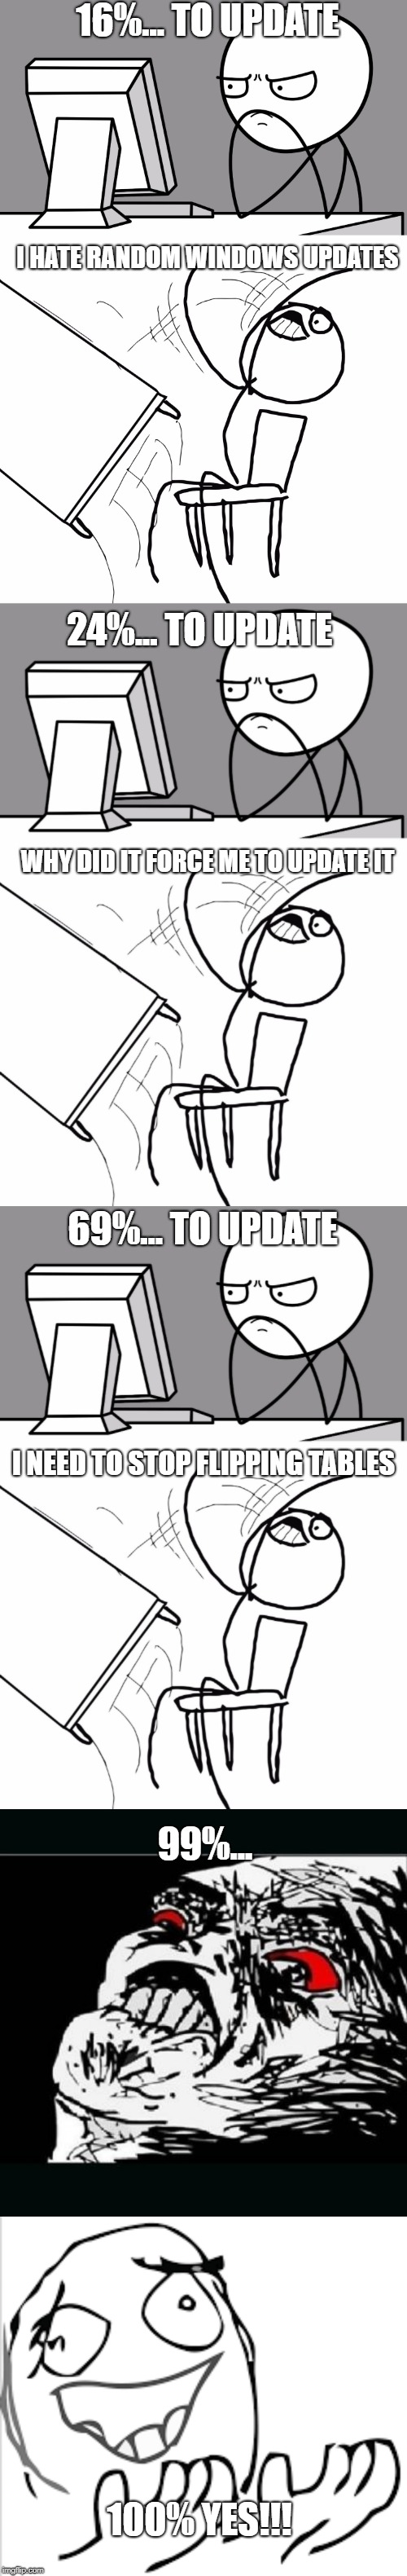 Me vs Updates | 16%... TO UPDATE; I HATE RANDOM WINDOWS UPDATES; 24%... TO UPDATE; WHY DID IT FORCE ME TO UPDATE IT; 69%... TO UPDATE; I NEED TO STOP FLIPPING TABLES; 99%... 100% YES!!! | image tagged in computer guy and table flip guy | made w/ Imgflip meme maker